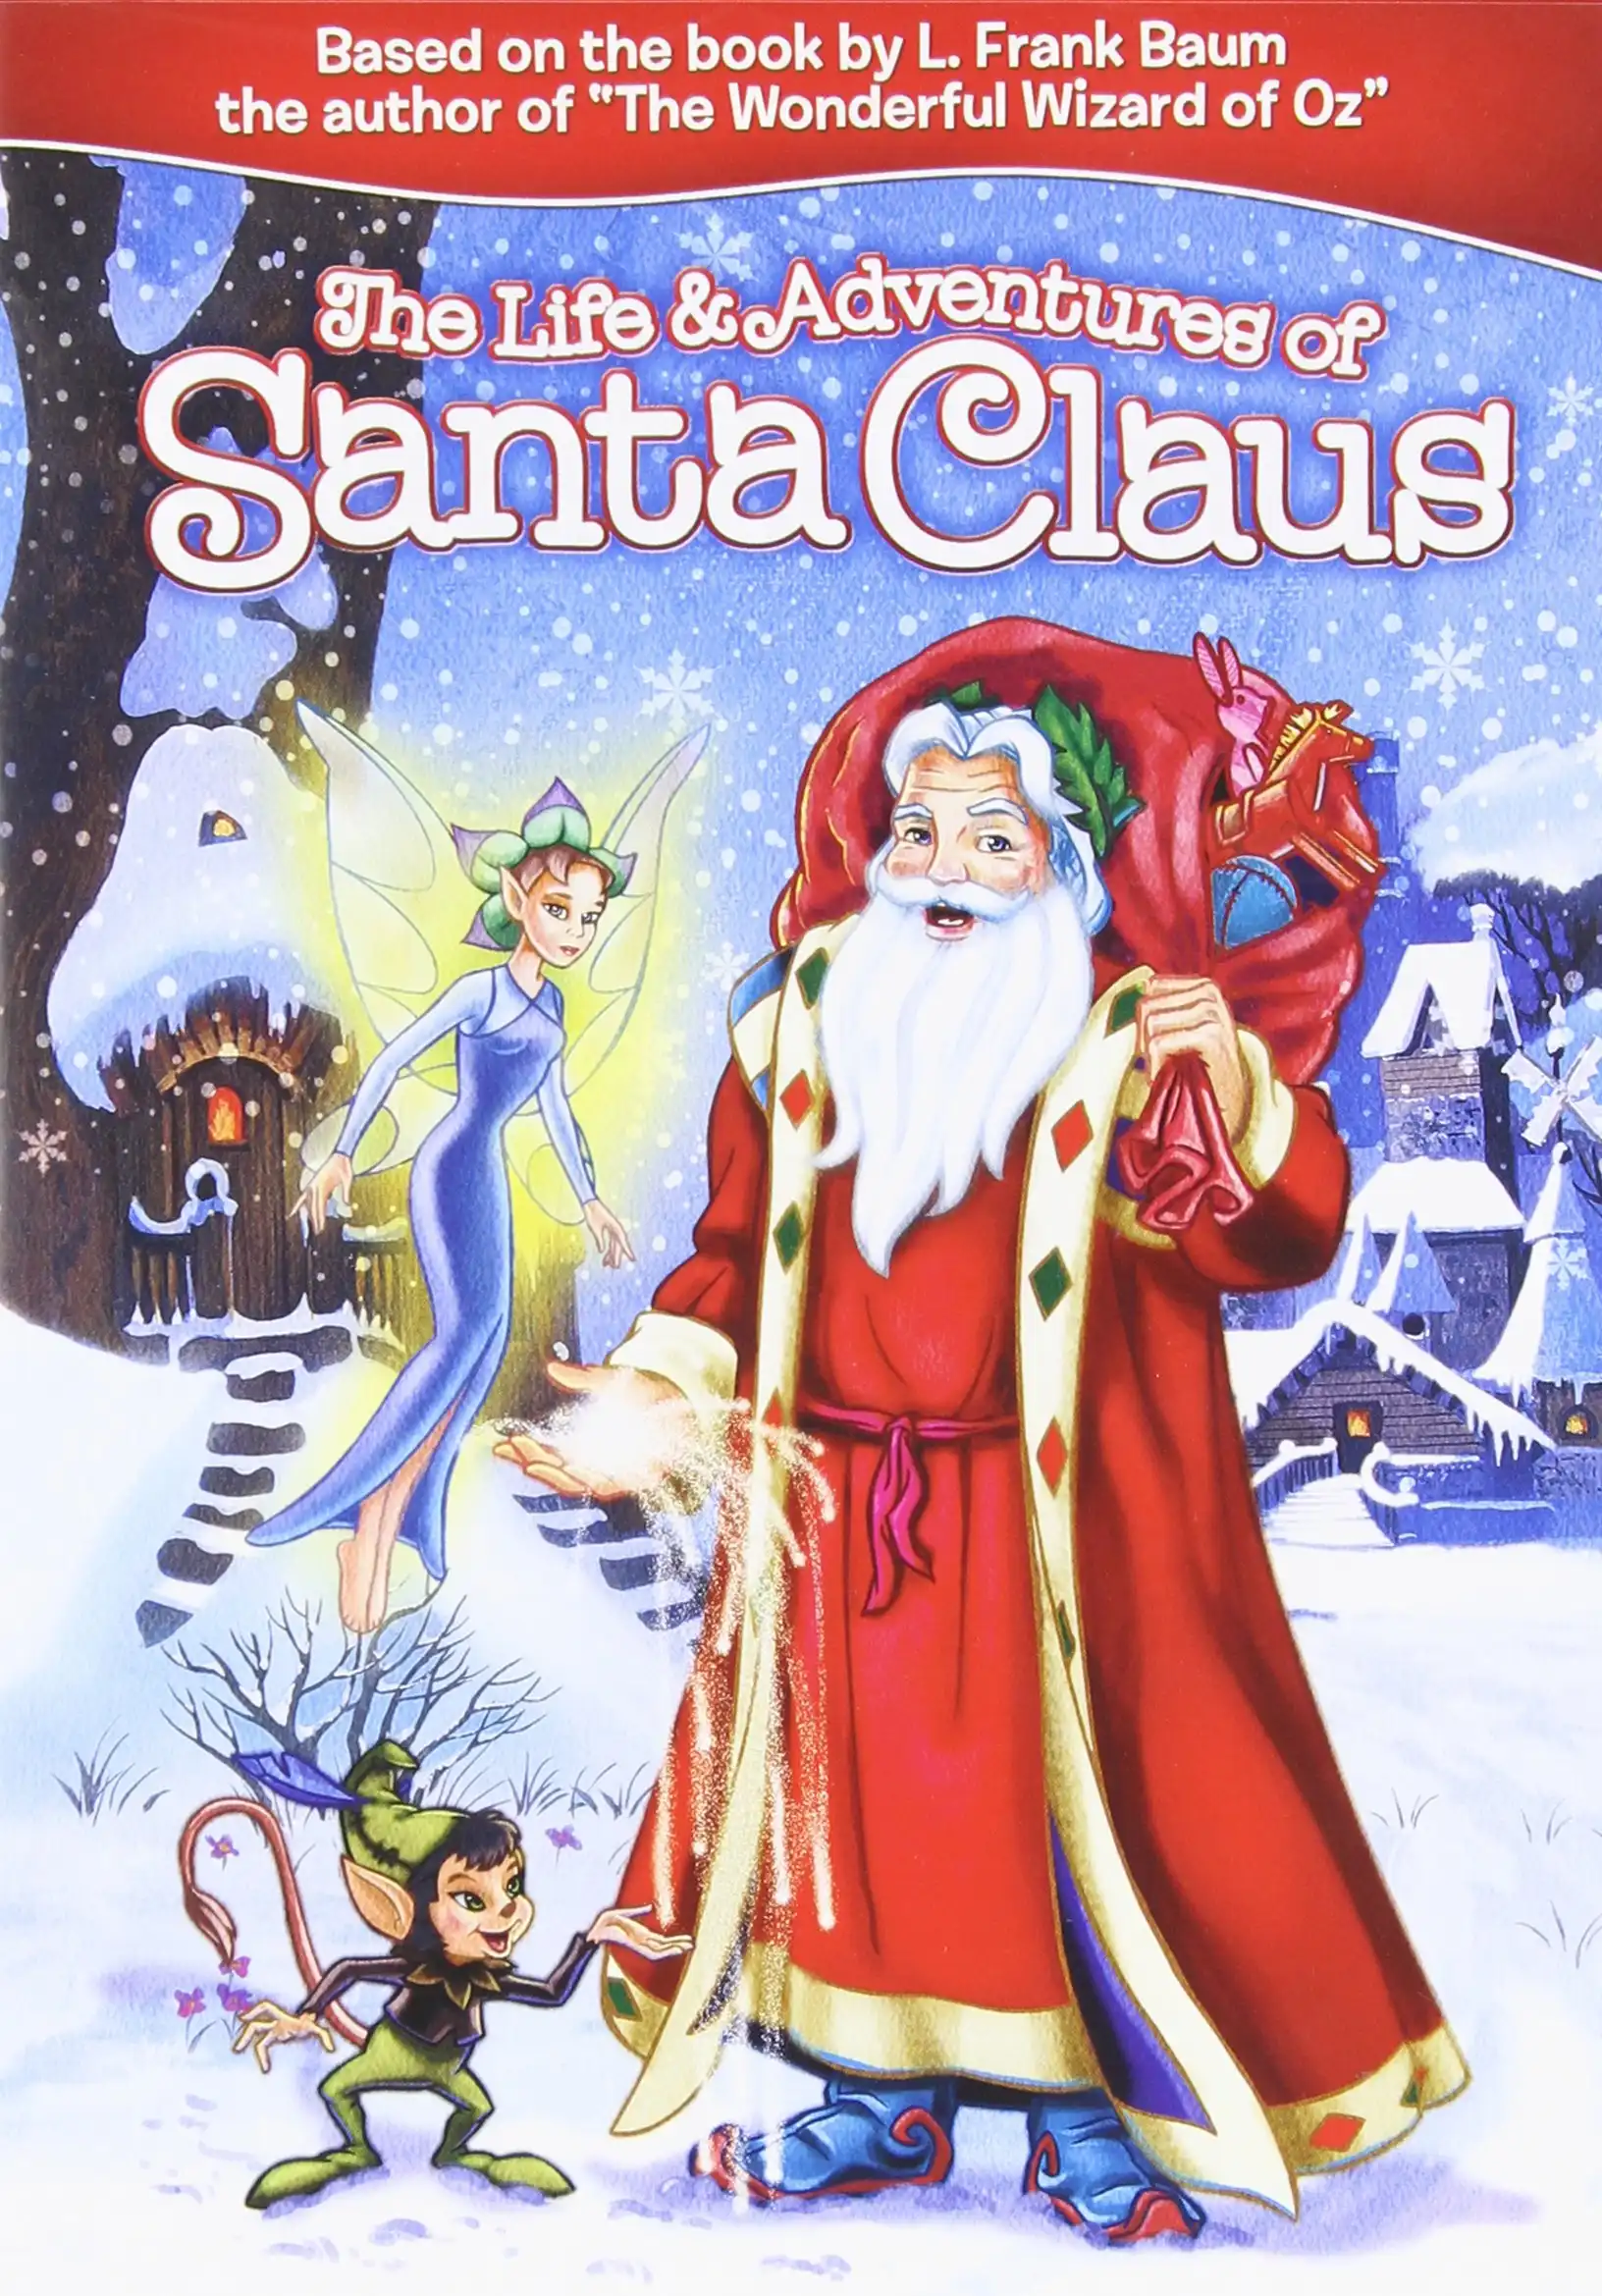 Watch and Download The Life & Adventures of Santa Claus 2